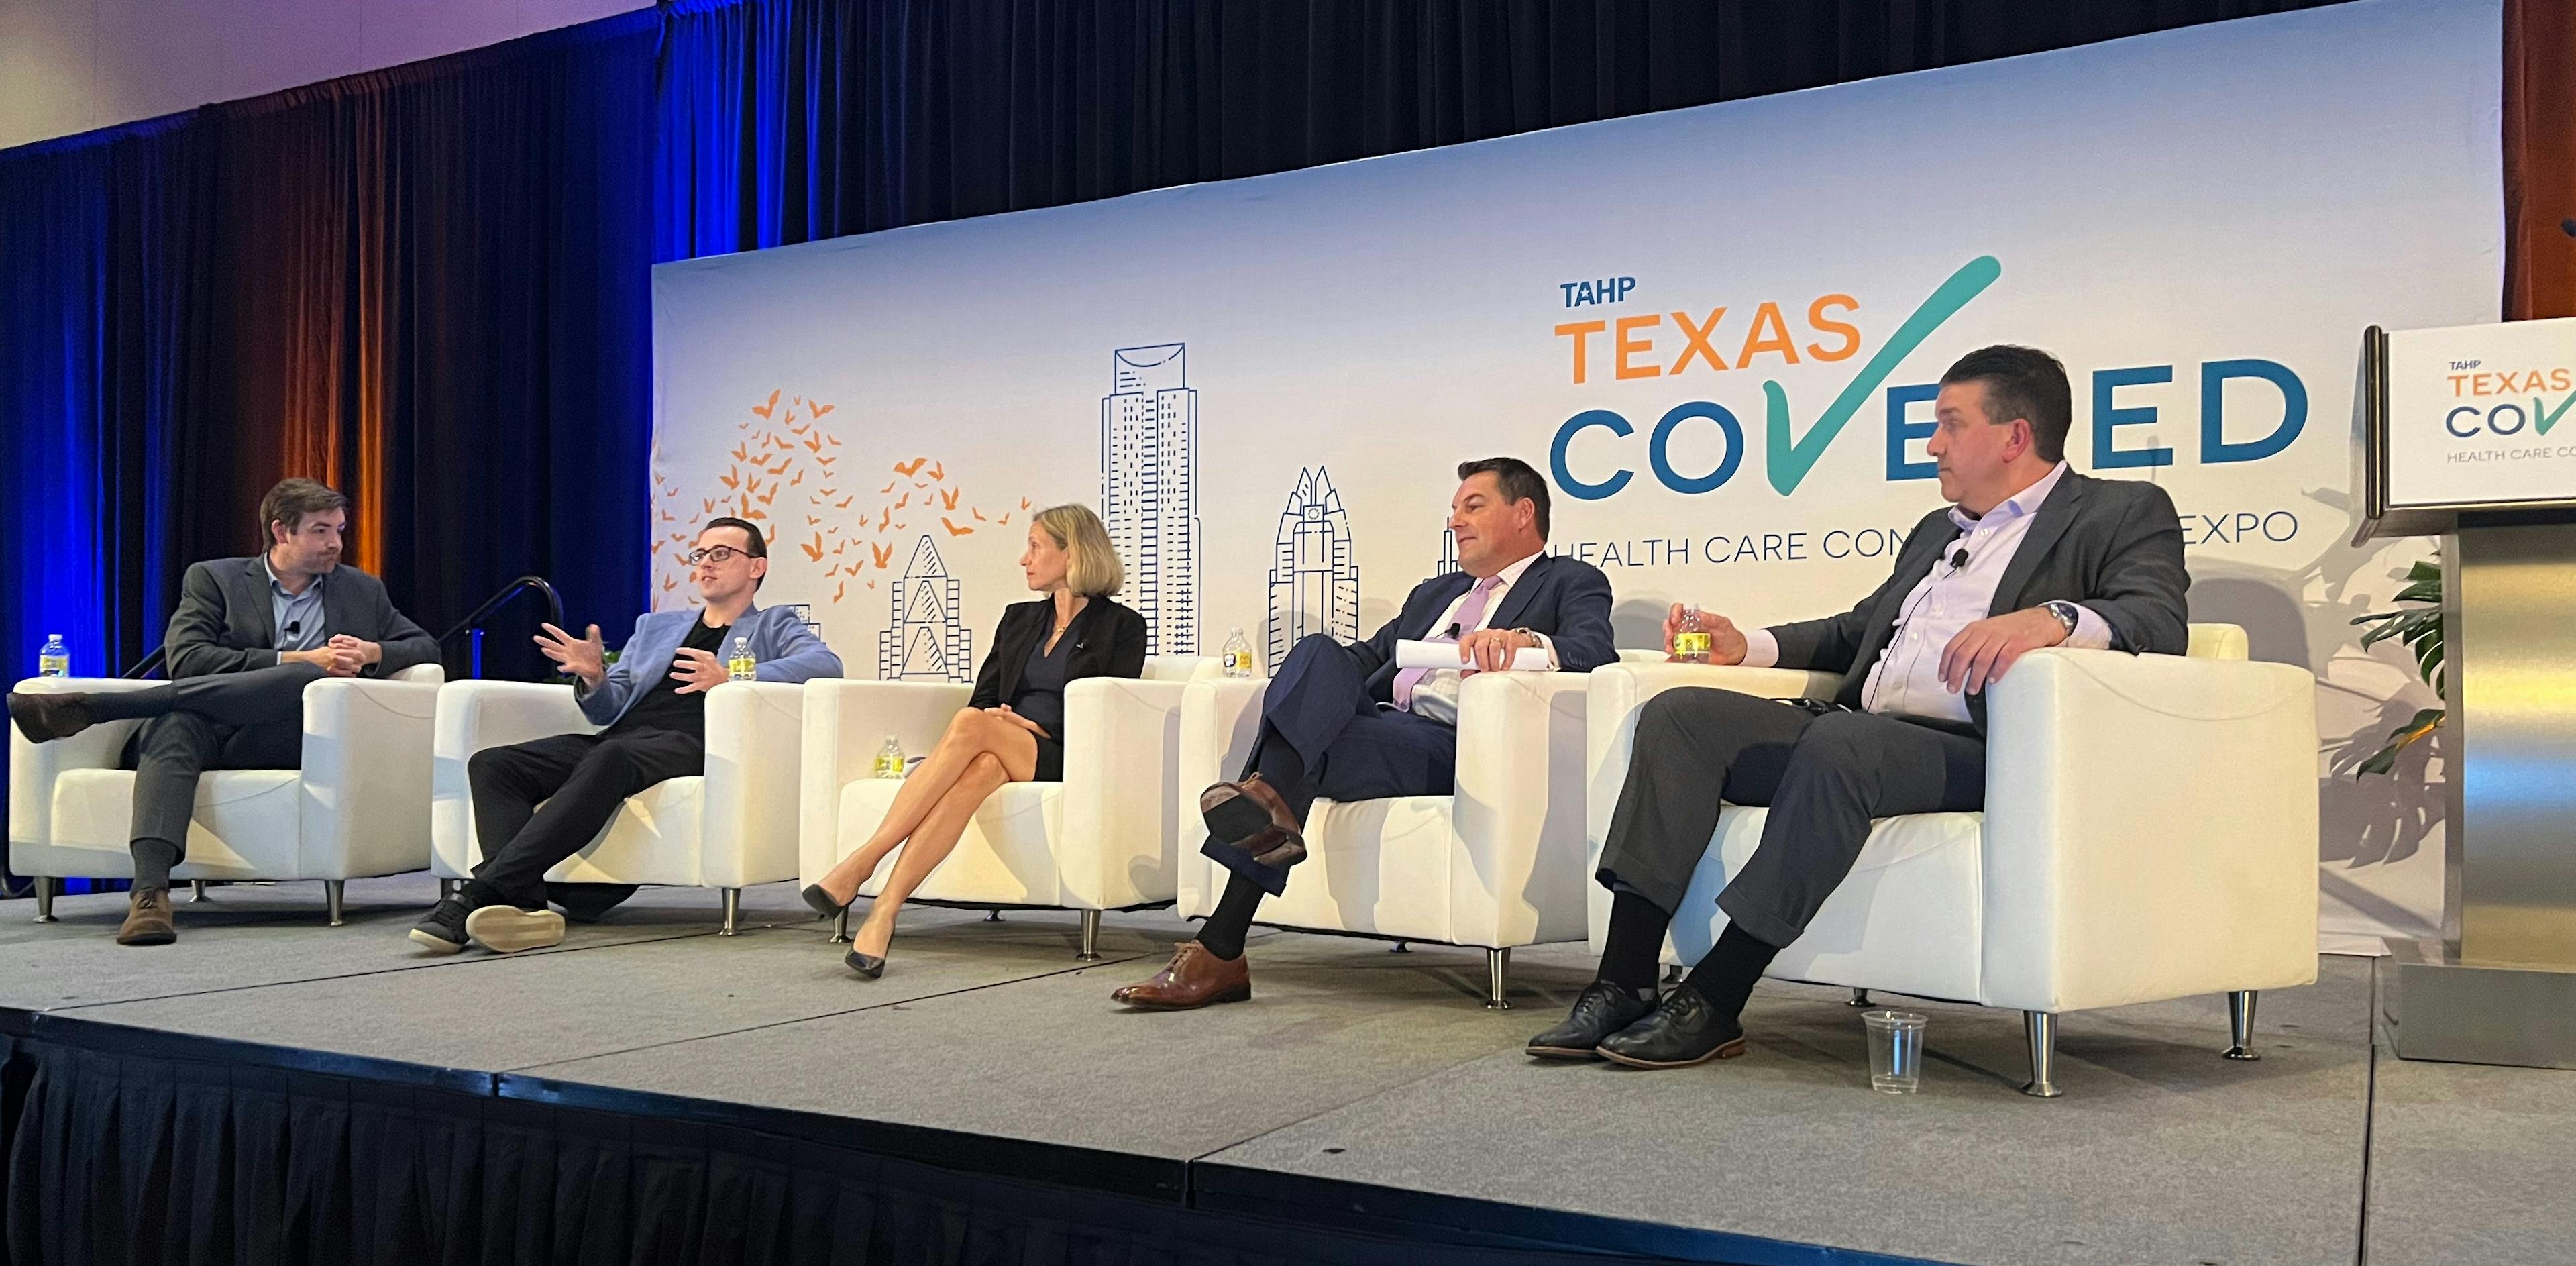 Curative CEO Fred Turner tackles the future of health care at Texas Covered 